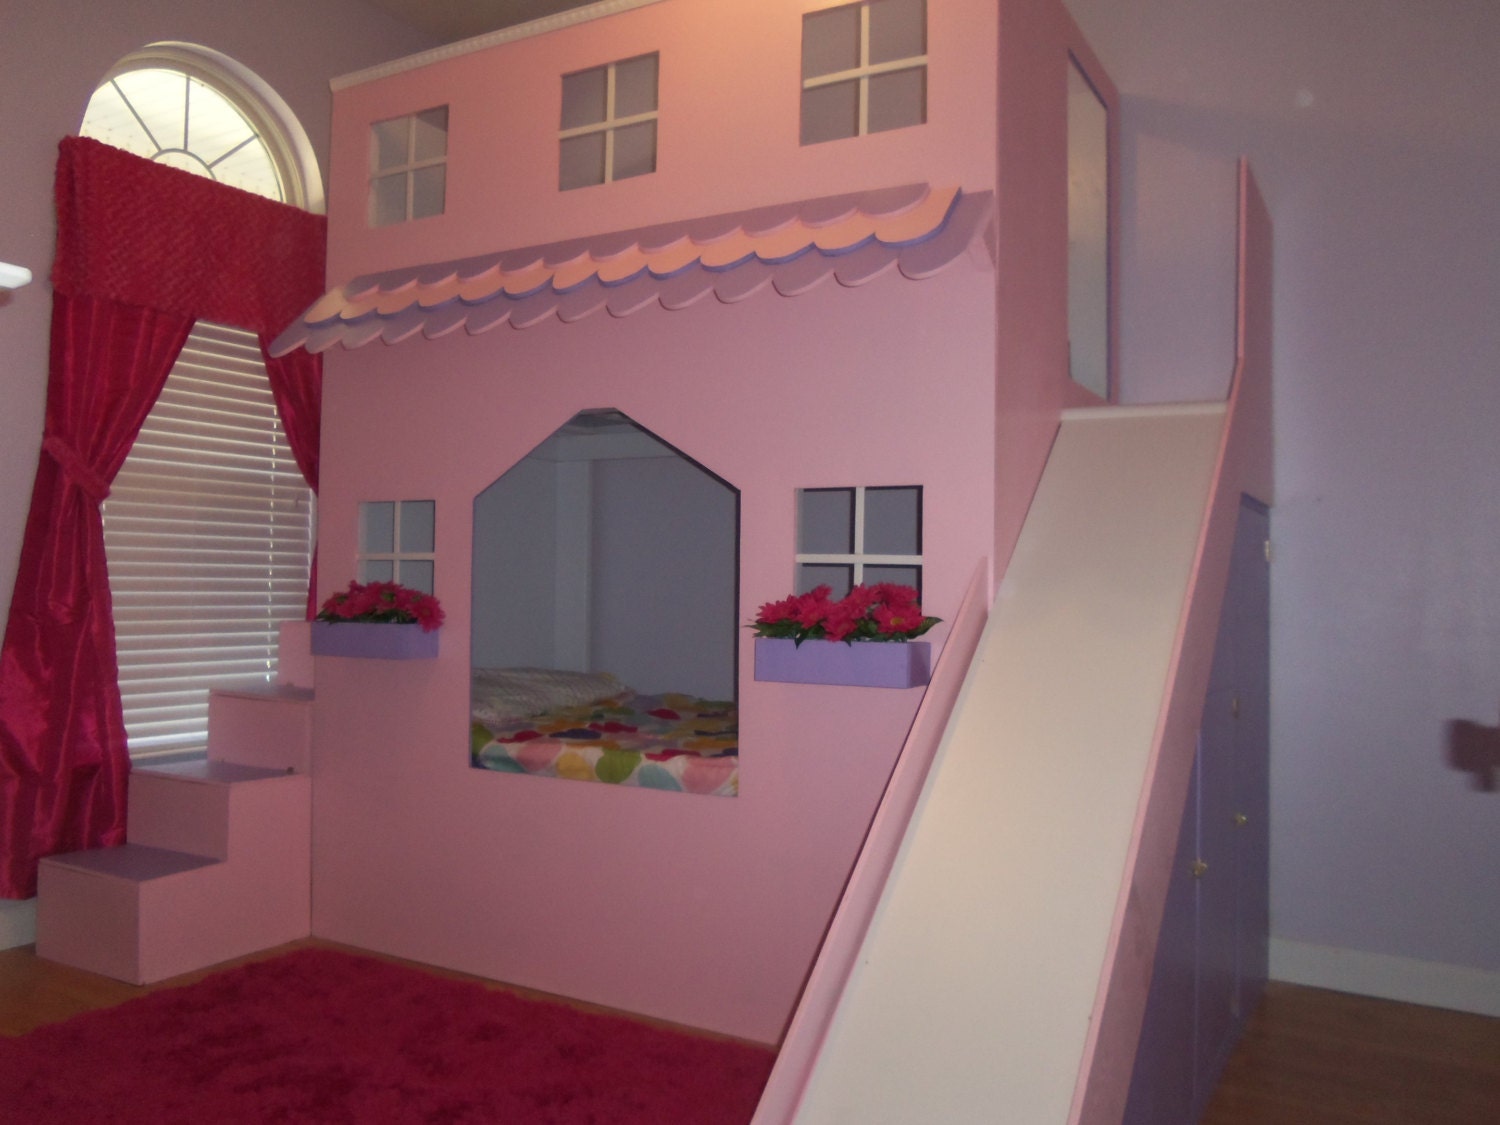 Playhouse Bunk Bed Plans